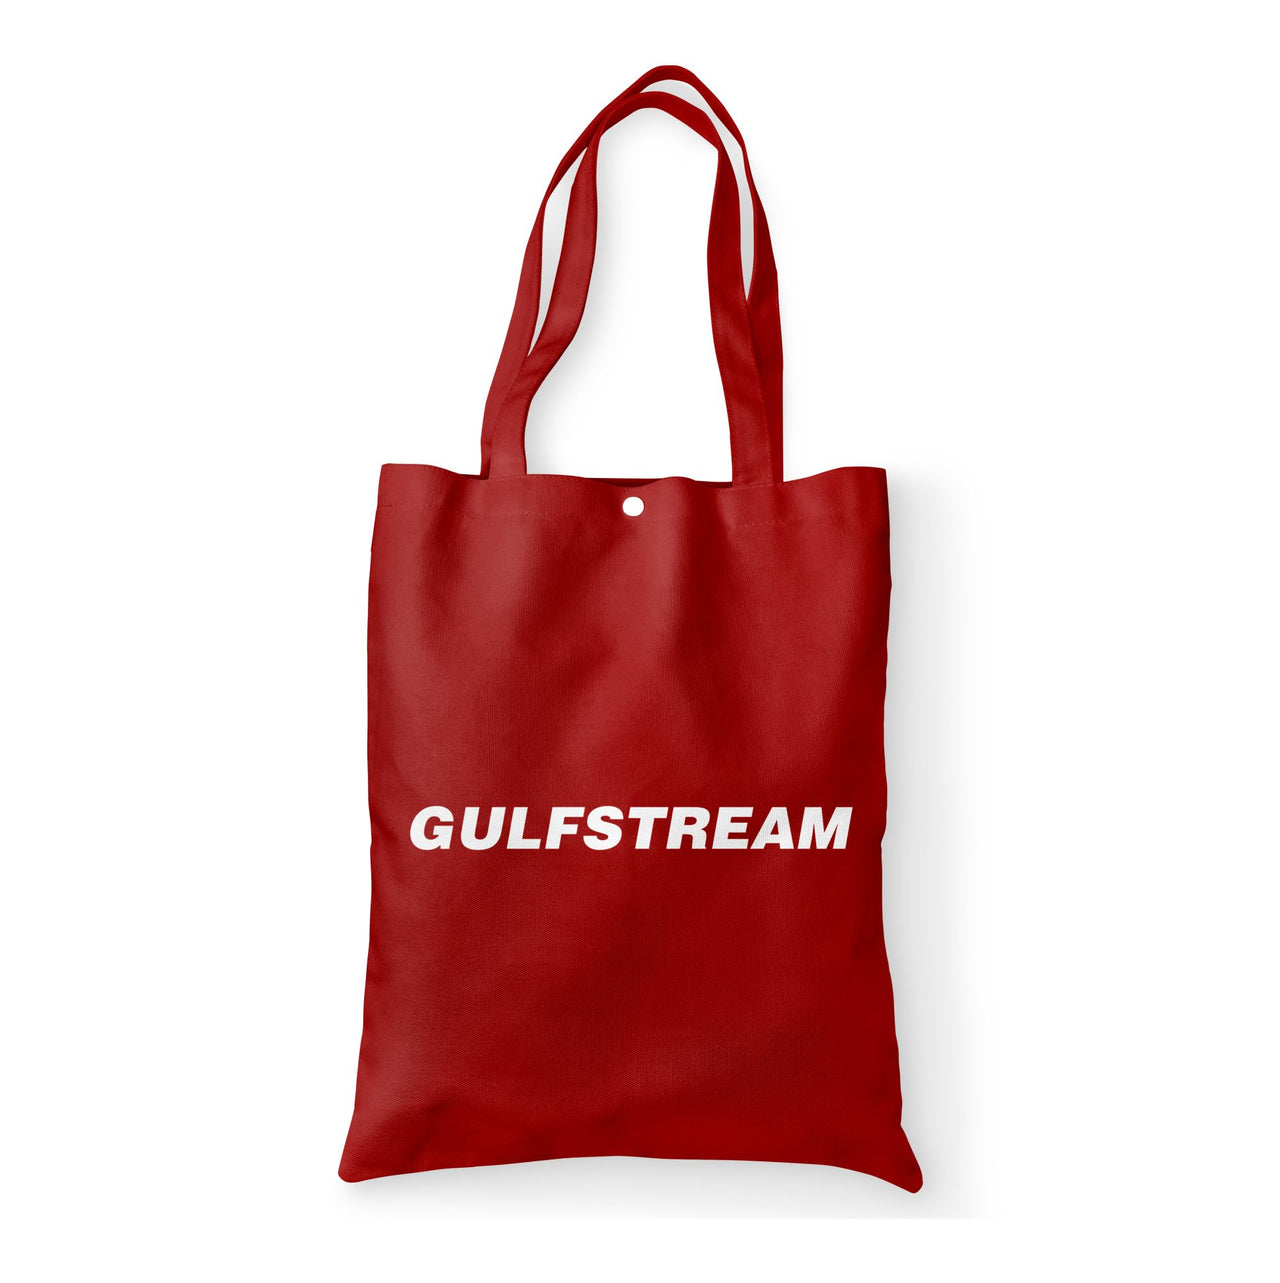 Gulfstream & Text Designed Tote Bags